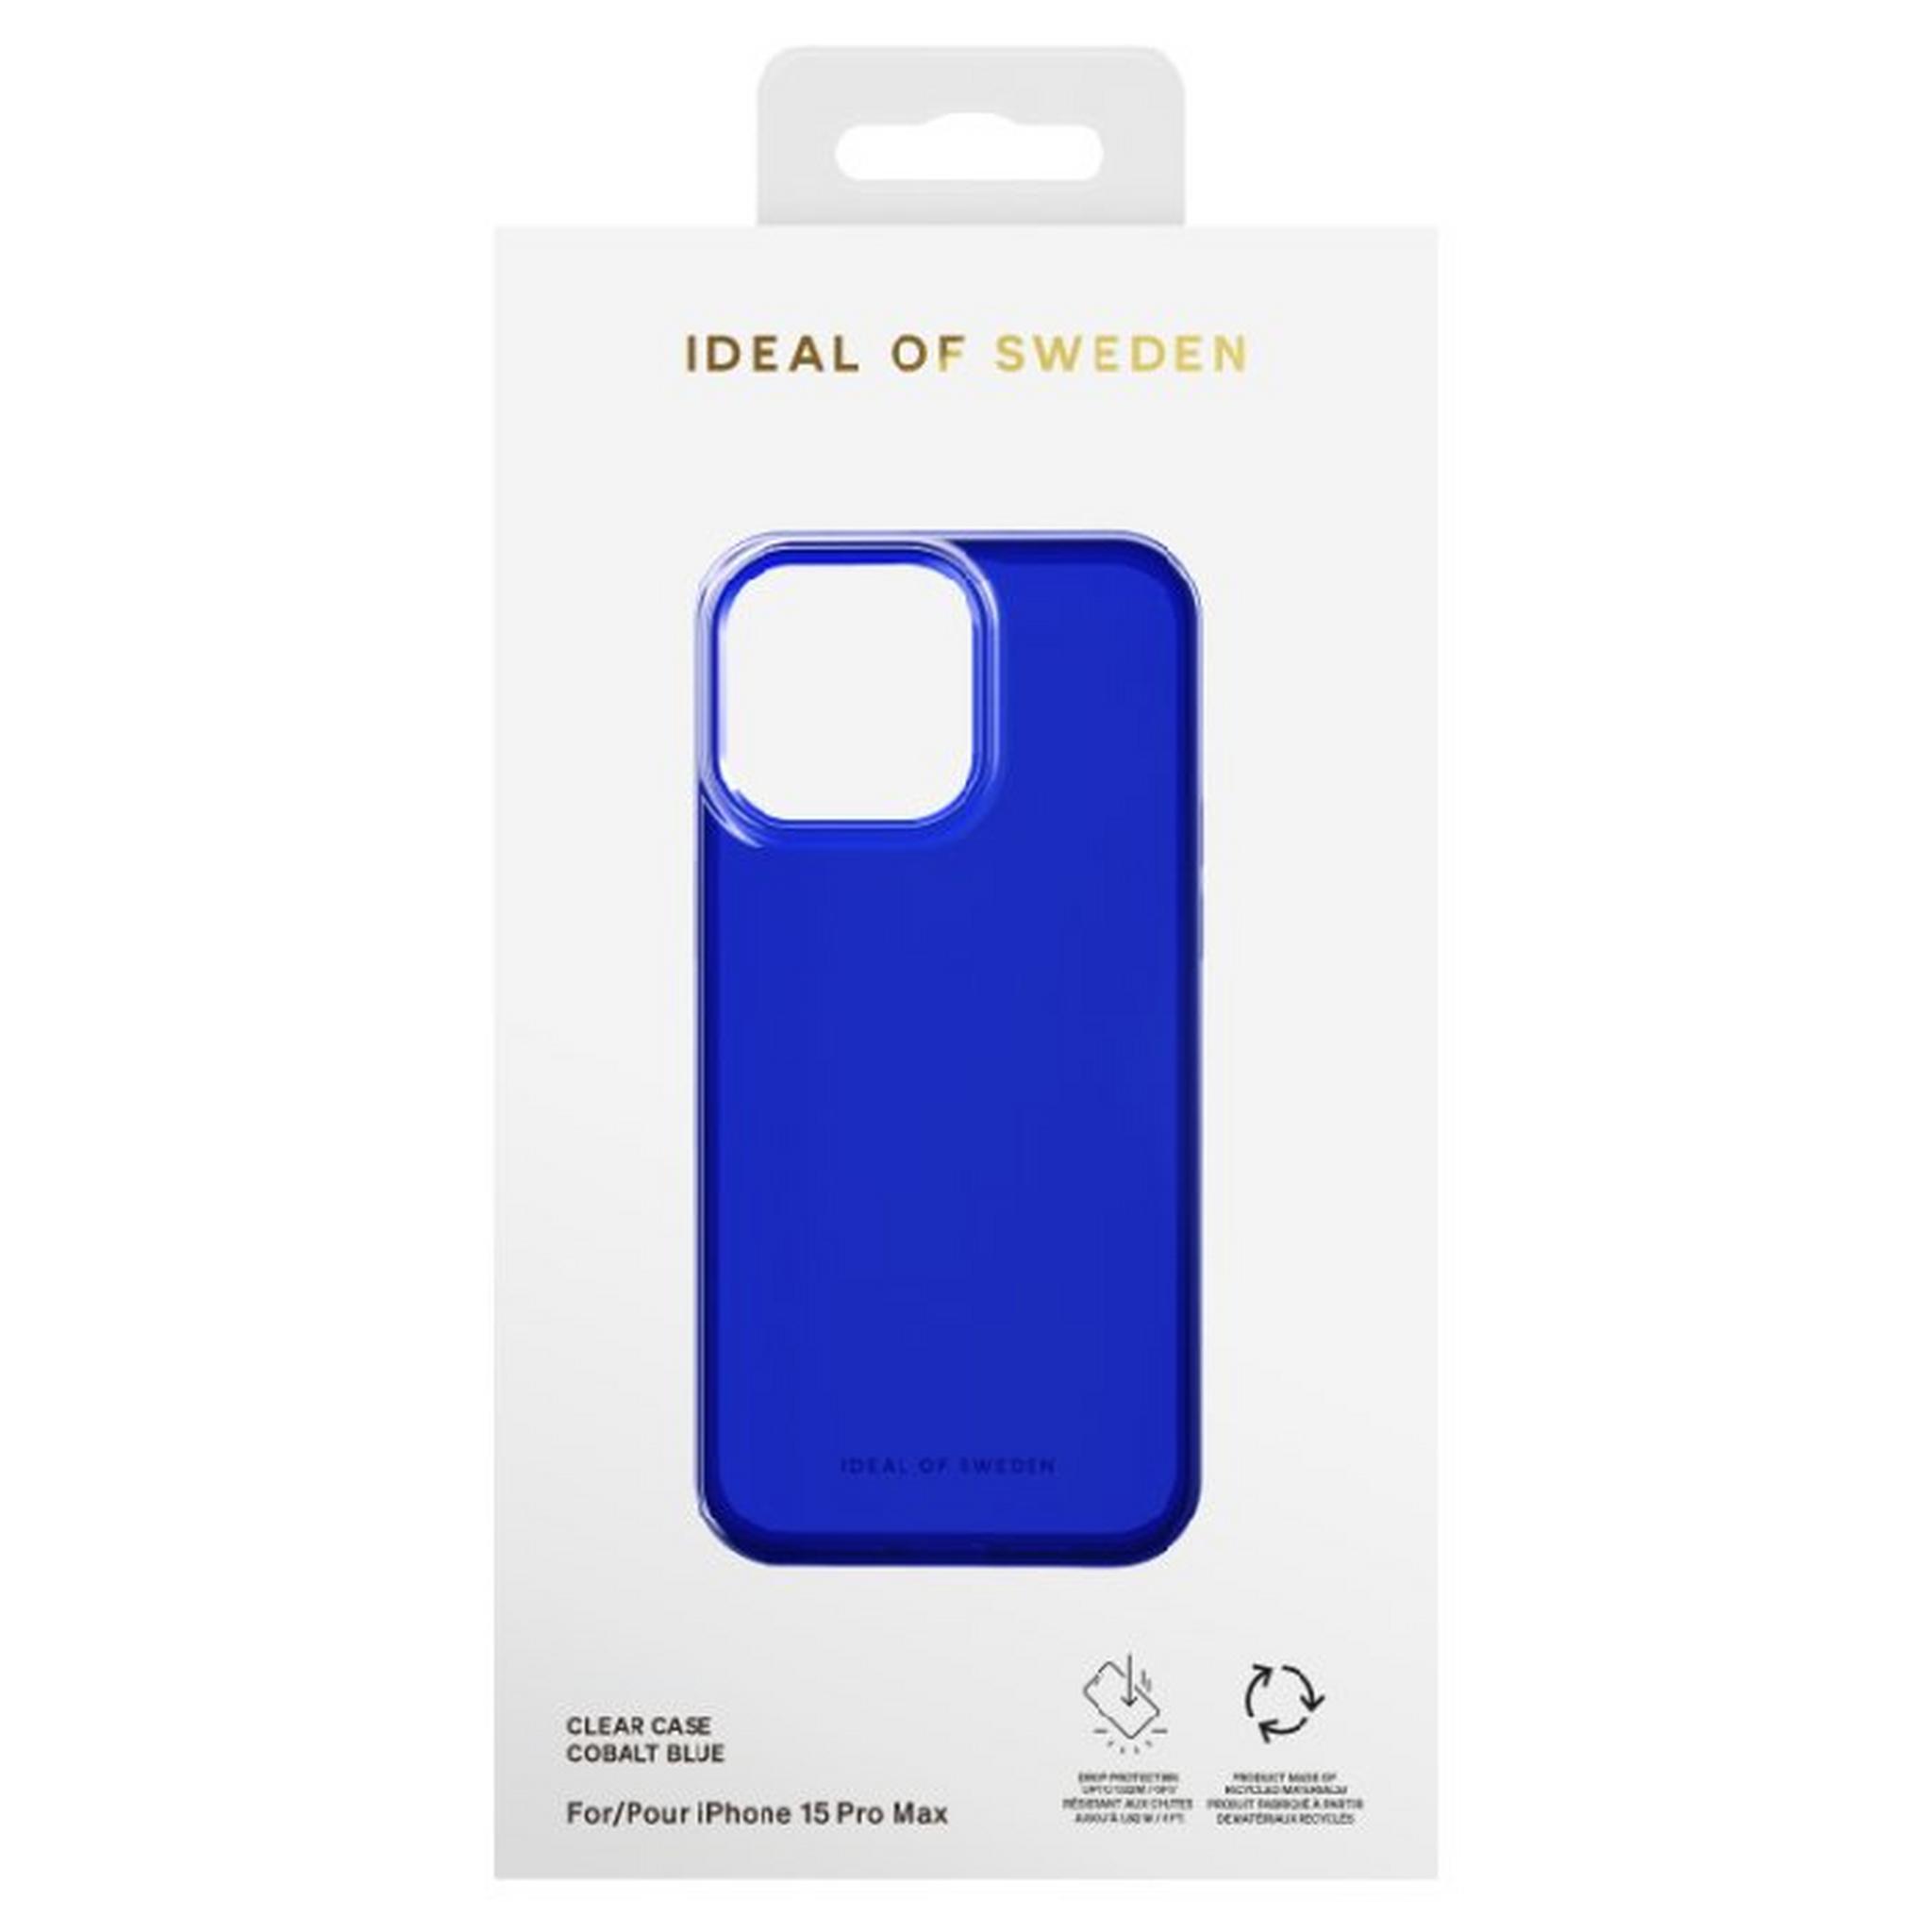 Ideal of Sweden MagSafe Clear Case for iPhone 15 Pro Max (IDCLCMS-I2367P-480) - Cobelt Blue